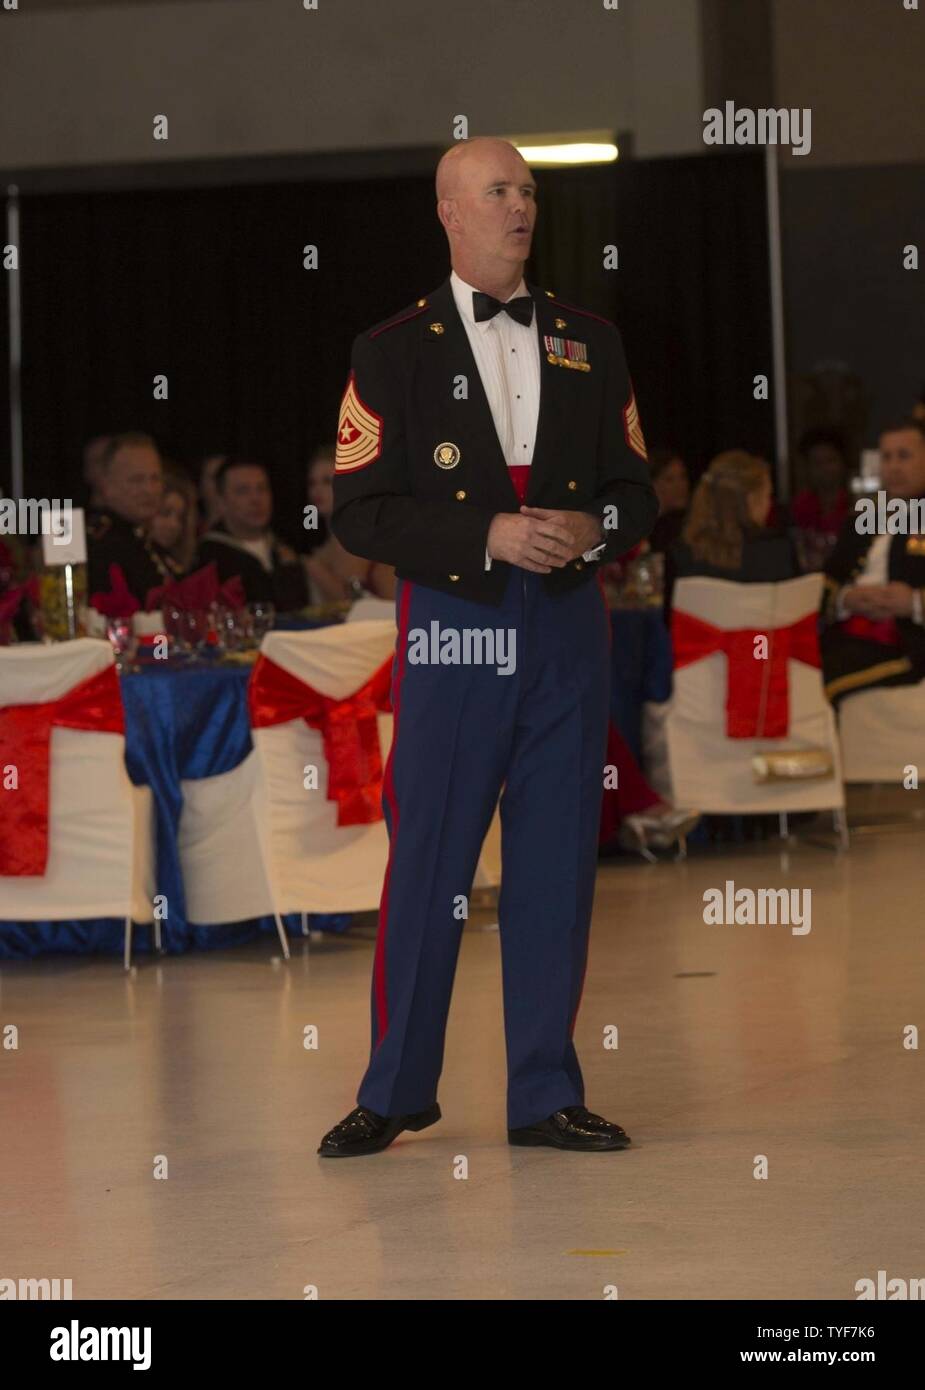 U.S. Marine Corps Sgt. Maj., Joseph Gray, Marine corps Barracks Washingon, gives a speech during the Headquarters and Headquarters Squadron Marine Corps Air Station New River 241st Marine Corps Birthday Ball at the Crystal Coast Civic Center, Morehead City, N.C., Nov. 5, 2016. The Marine Corps has carried 241 years of traditions, values and standards since its establishment in 1775. Stock Photo